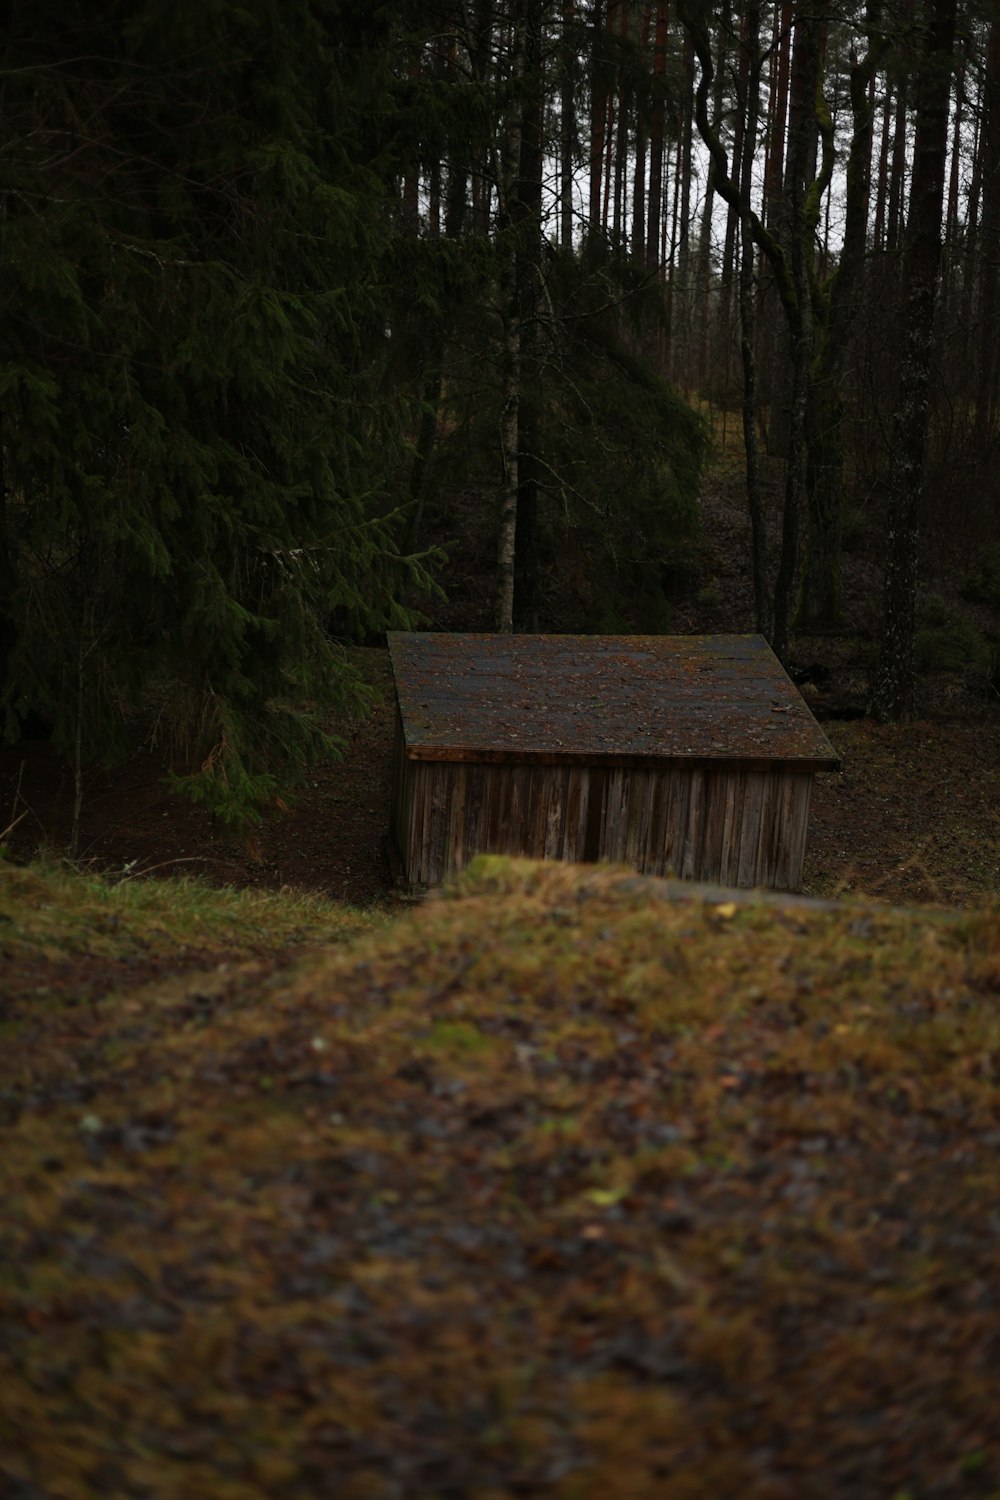 a shed in the middle of a forest